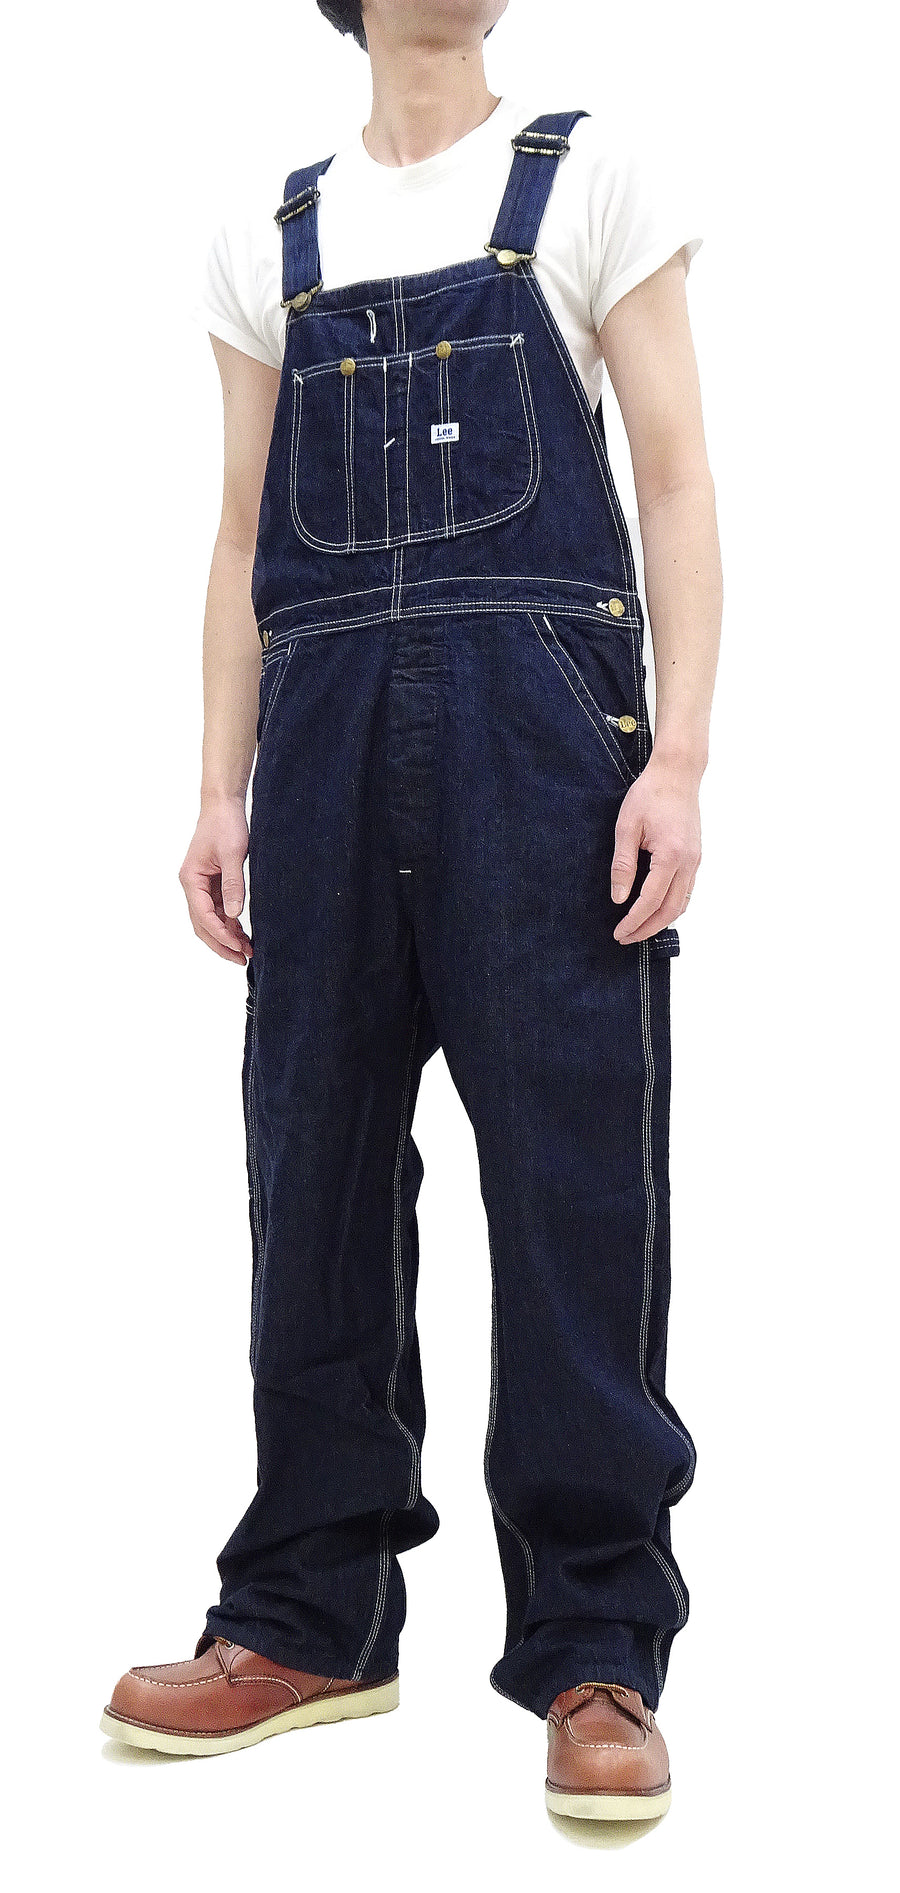 Lee Overalls Men's Casual Fashion Bib Overall High-Back LM7254 LM7254-2100 Rince Deep Blue Indigo